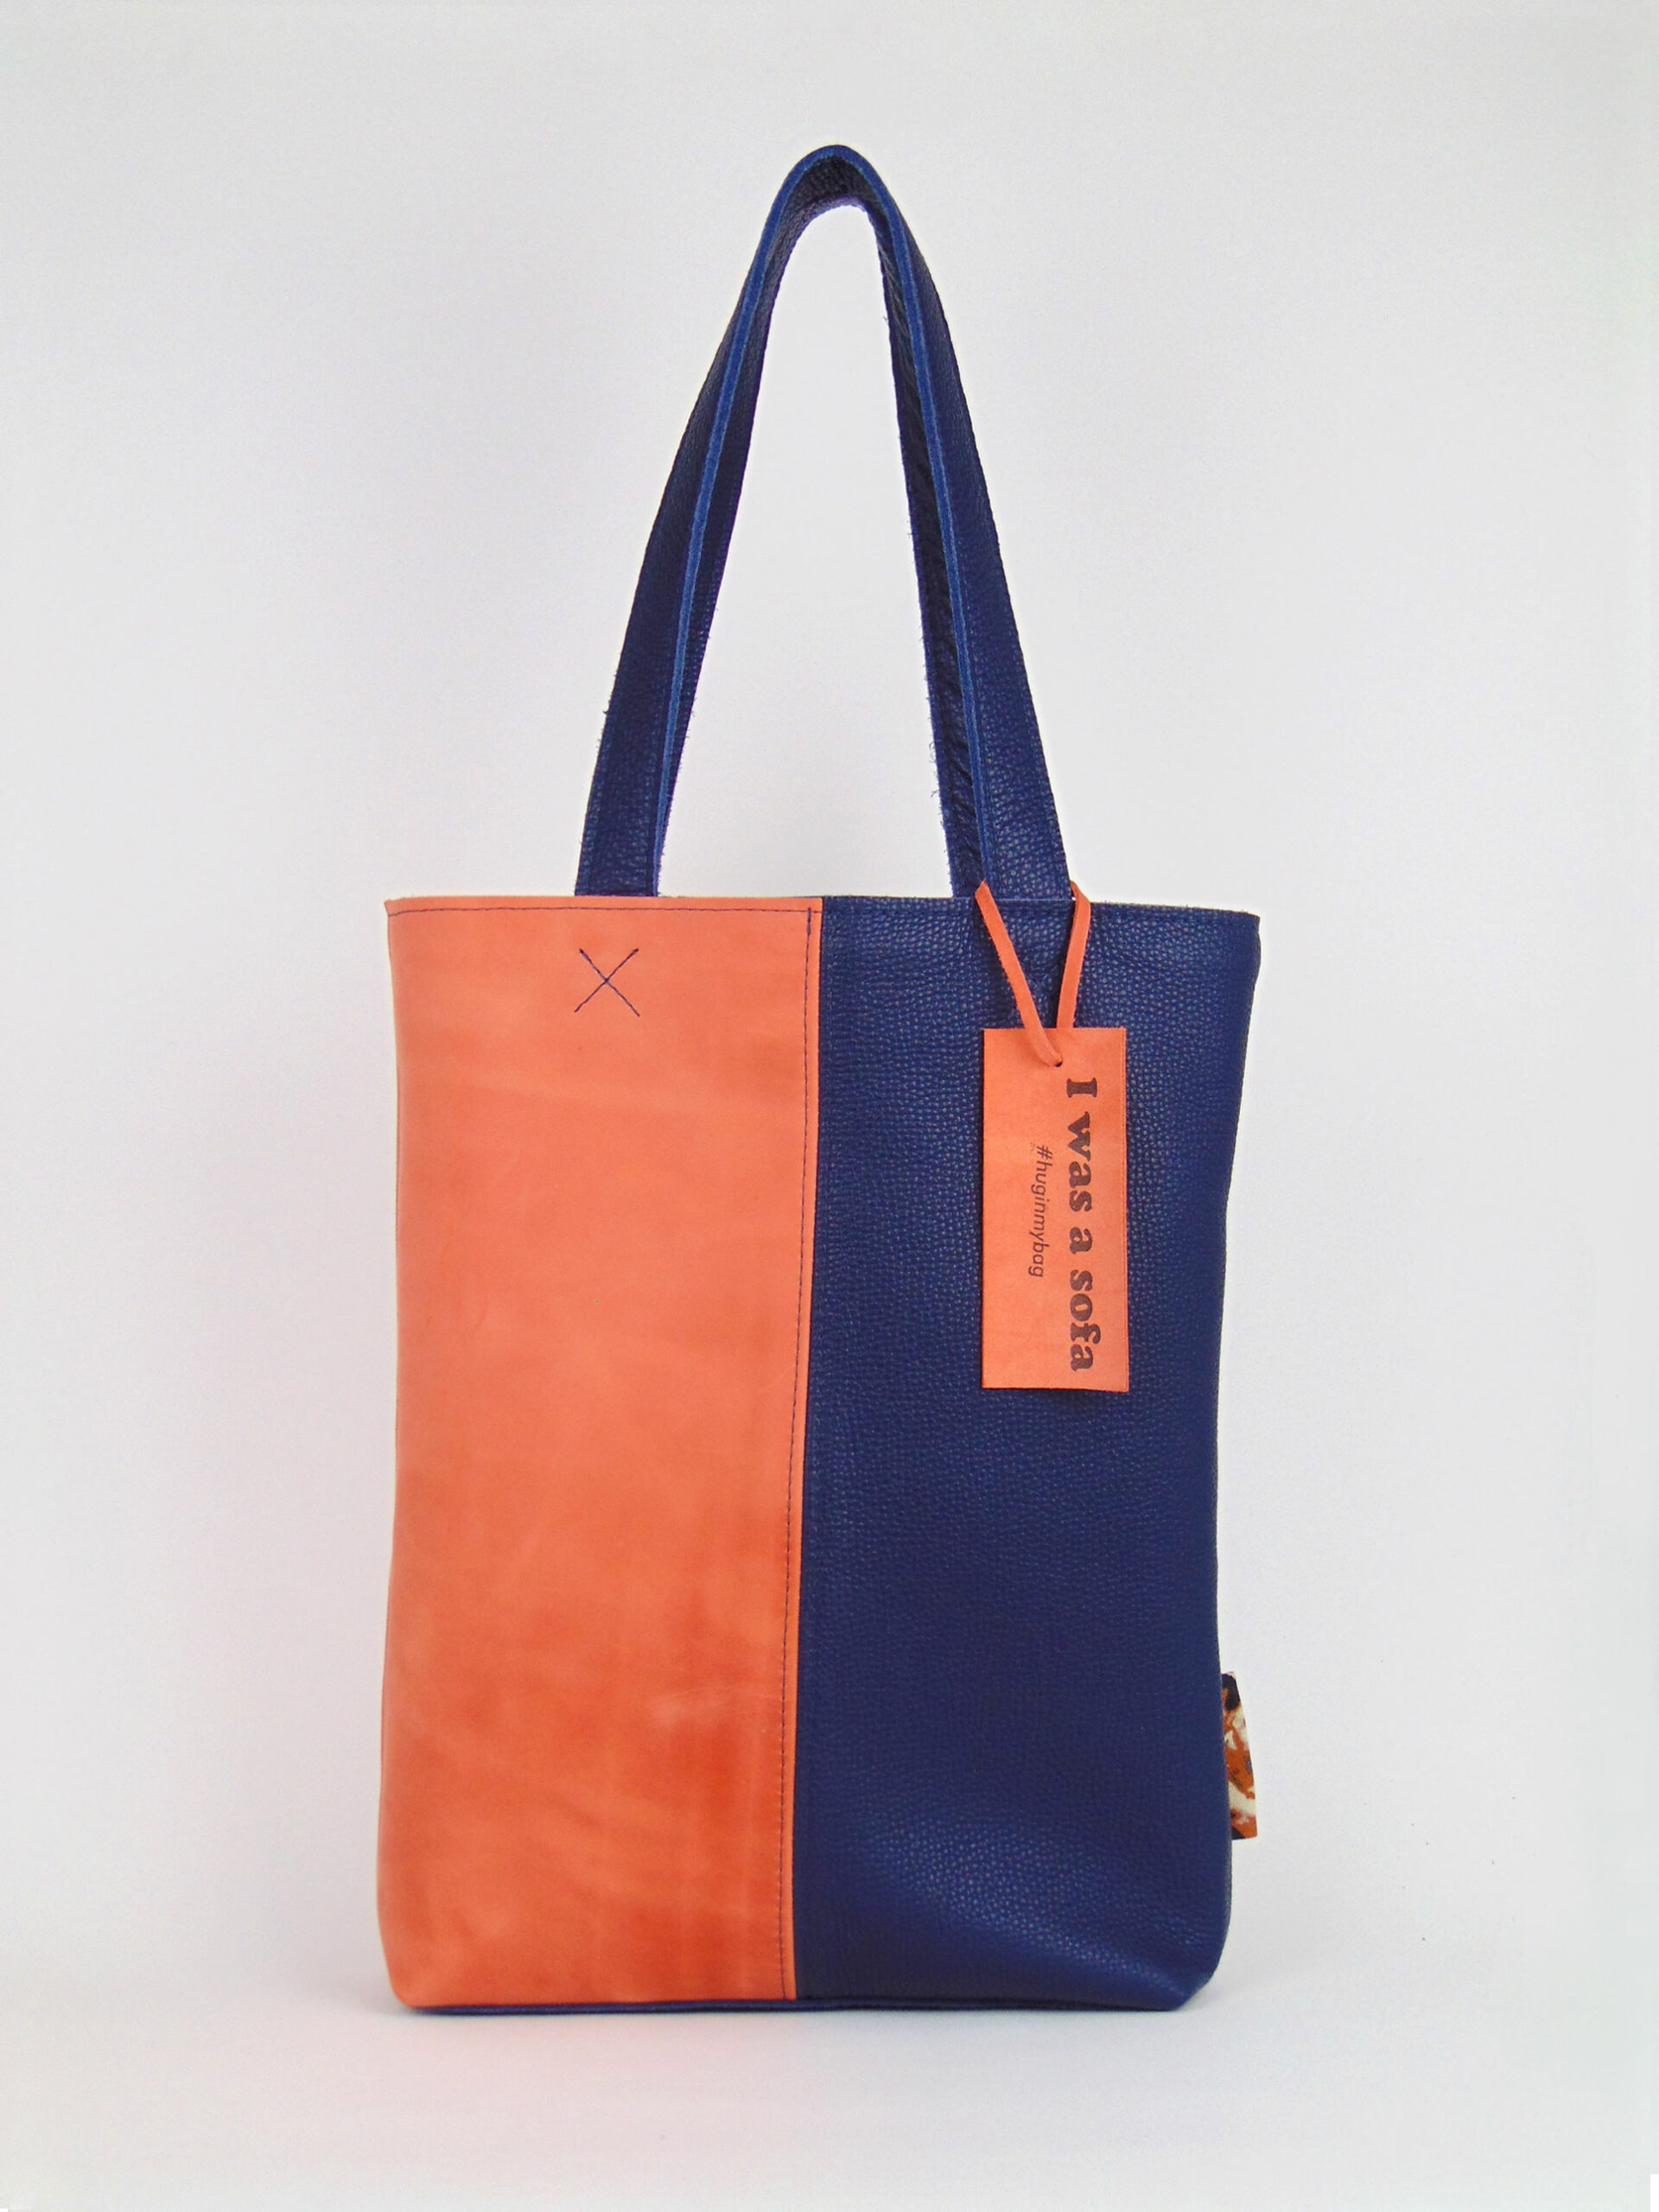 Product image of the shopper named Sporty Blue. This shopper is made from recycled leather in a colour combination of blue and orange.